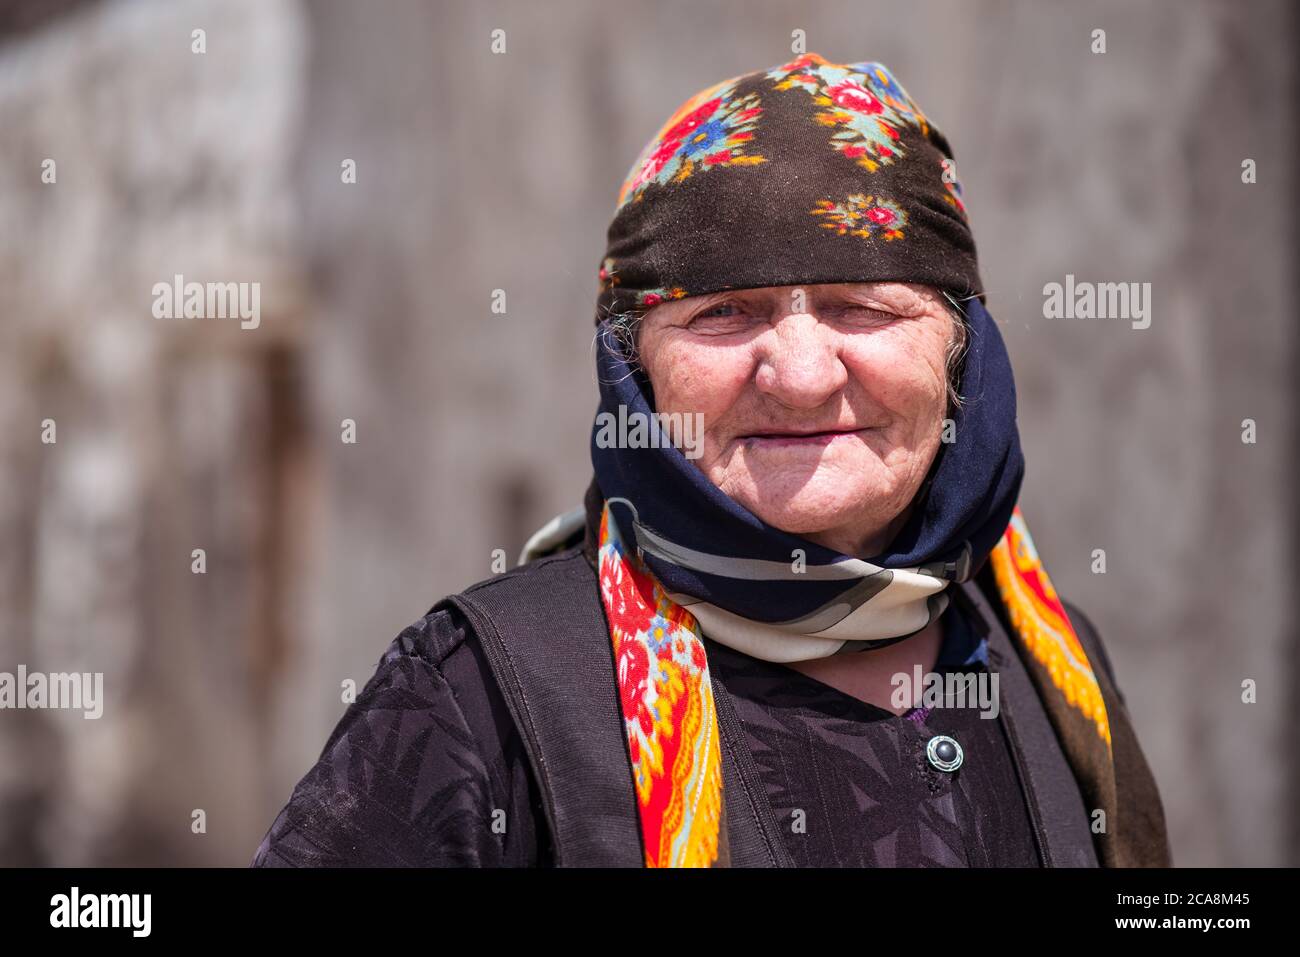 Xinaliq / Azerbaijan - July 8, 2019: Portrait of old woman with colorful head scarf in mountain village Stock Photo